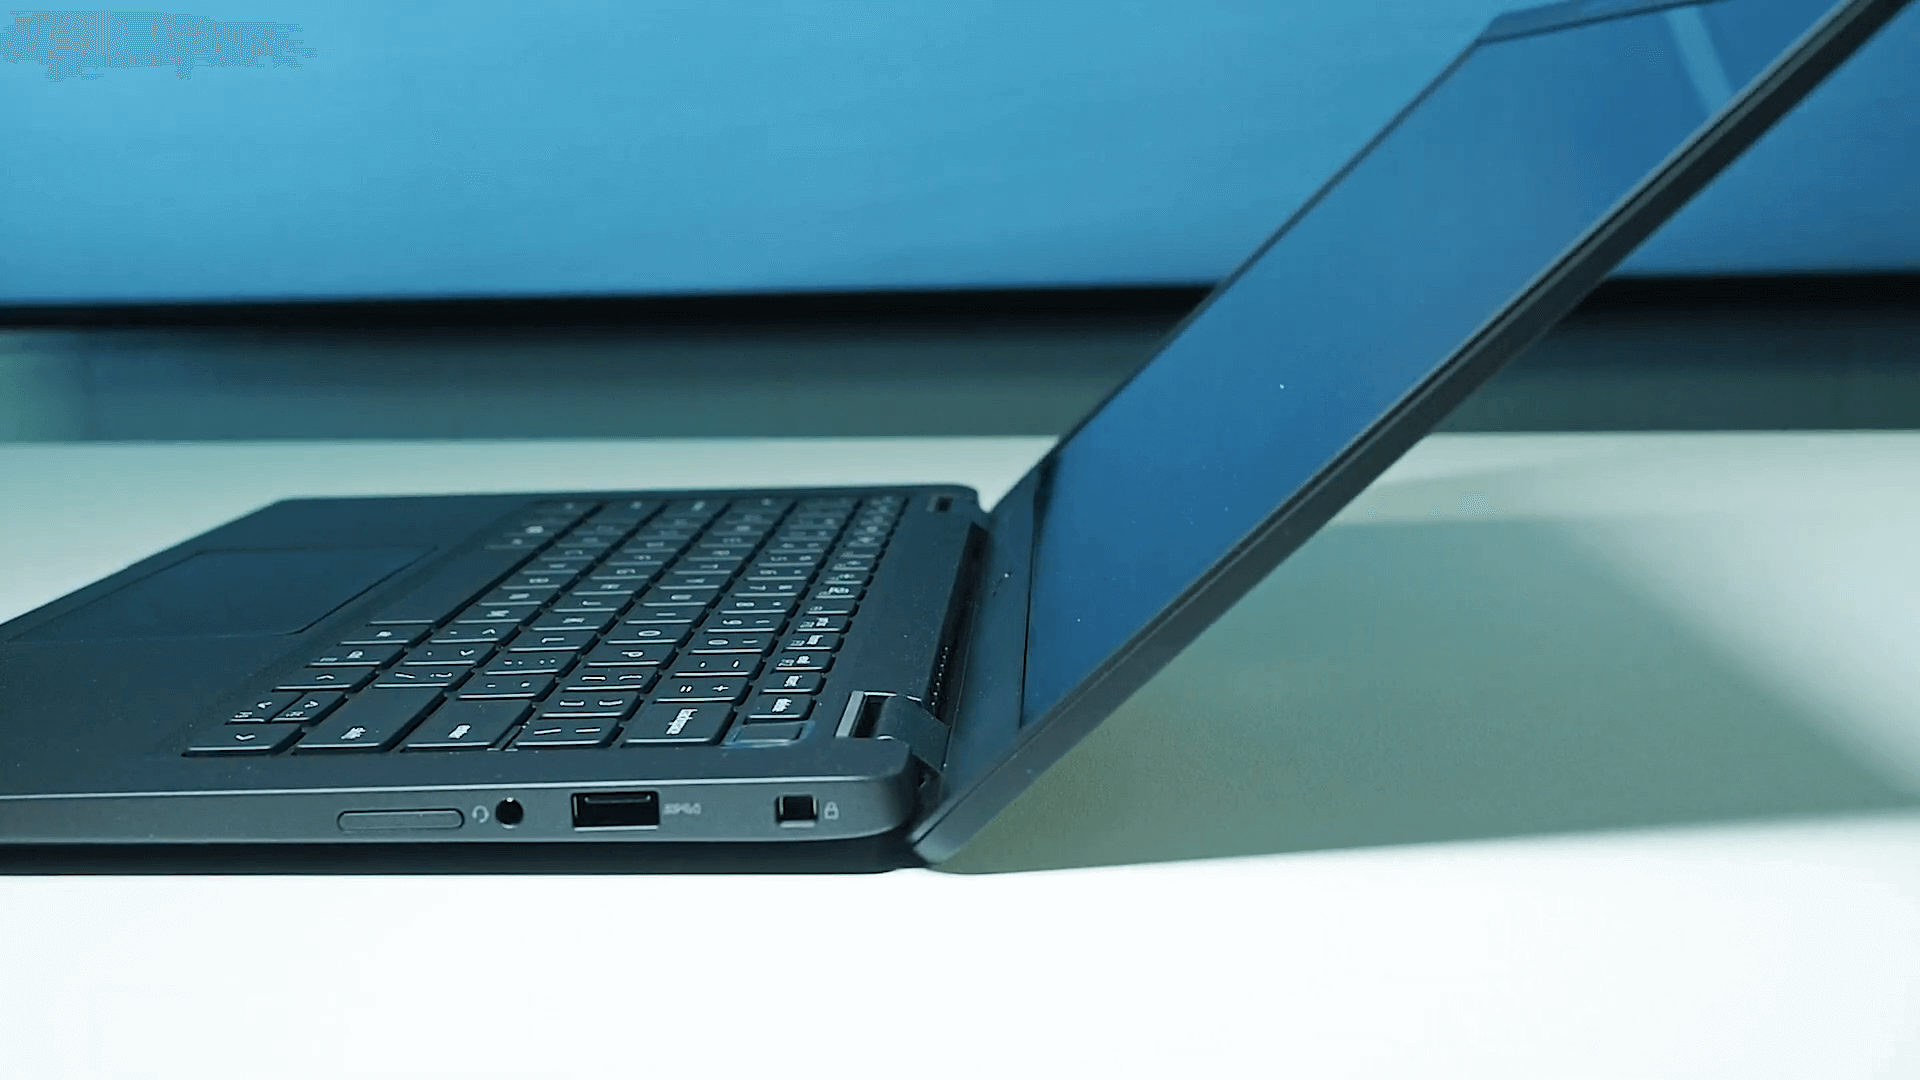 Dell Latitude 13 7310 vs XPS 13 9300: Which One is Better to Buy?